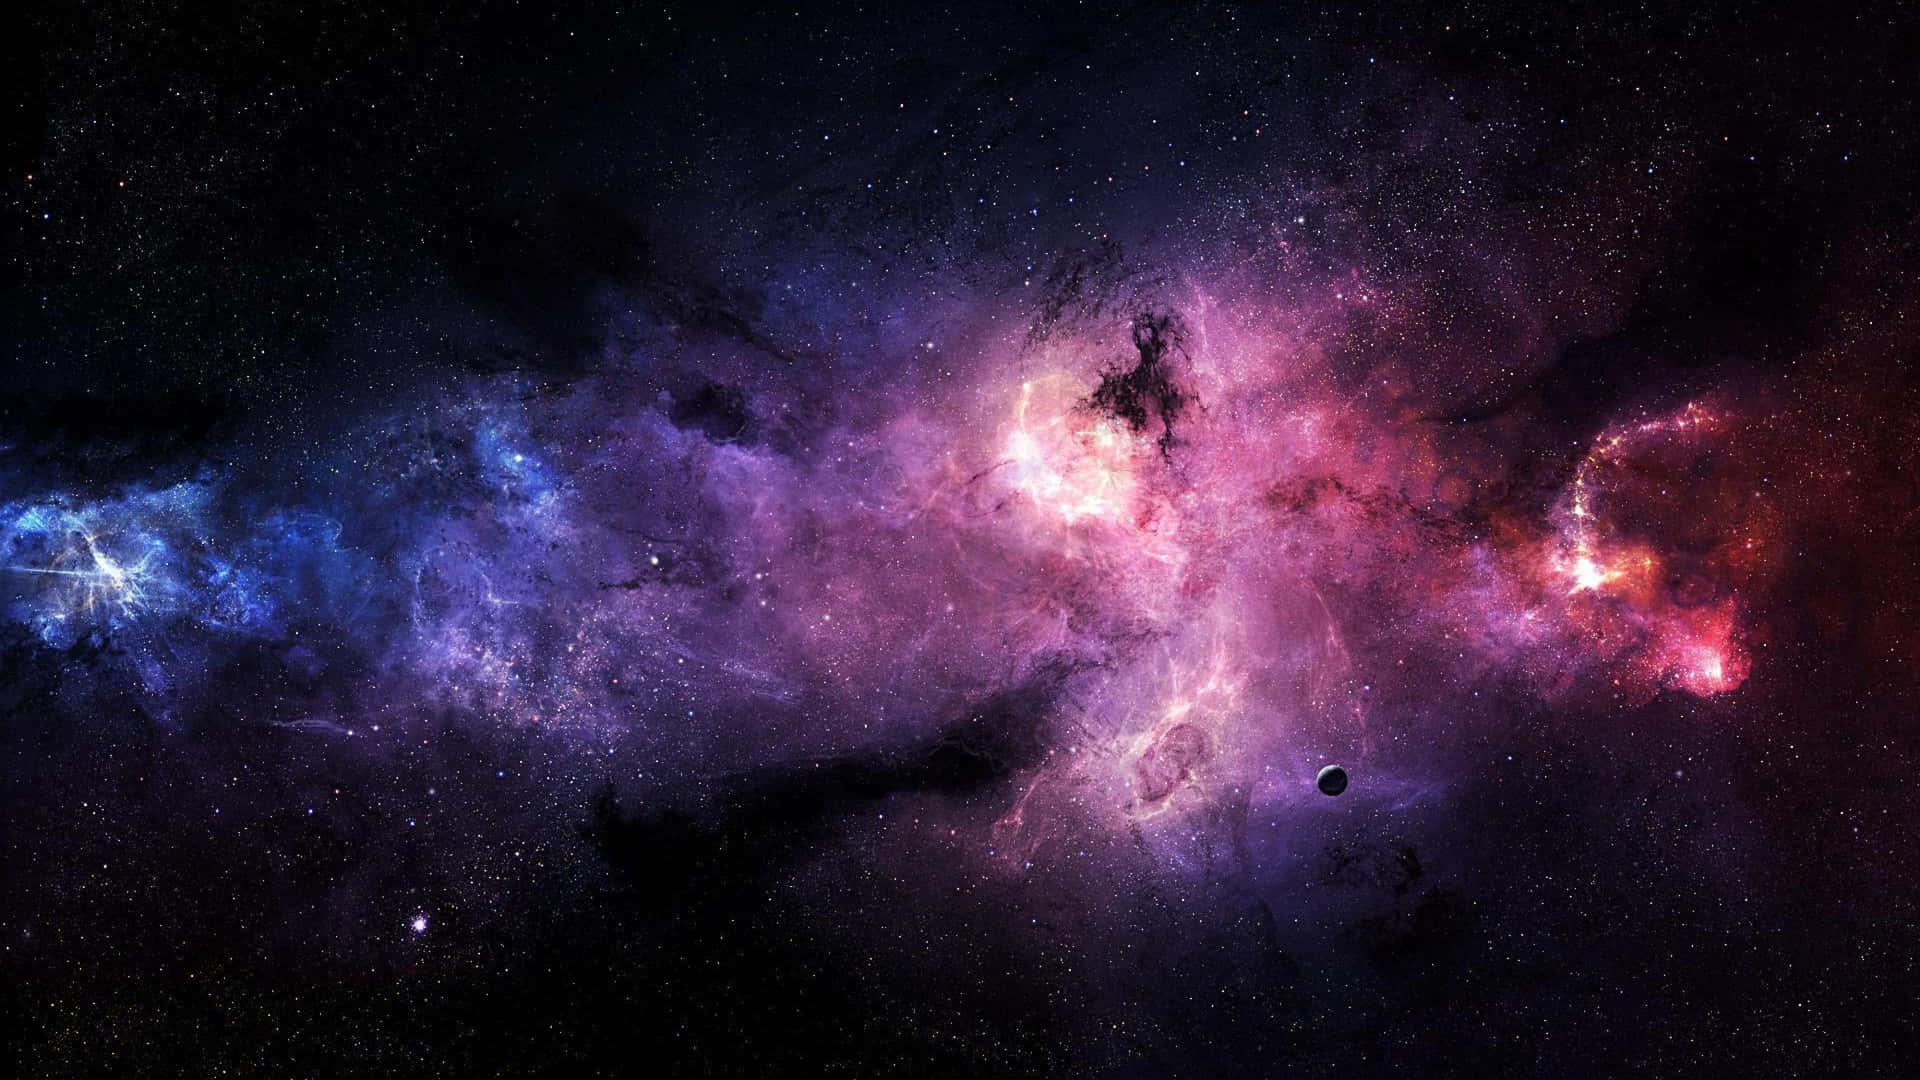 "A Mystery of Space - Gaze into the Mysterious Nebula" Wallpaper